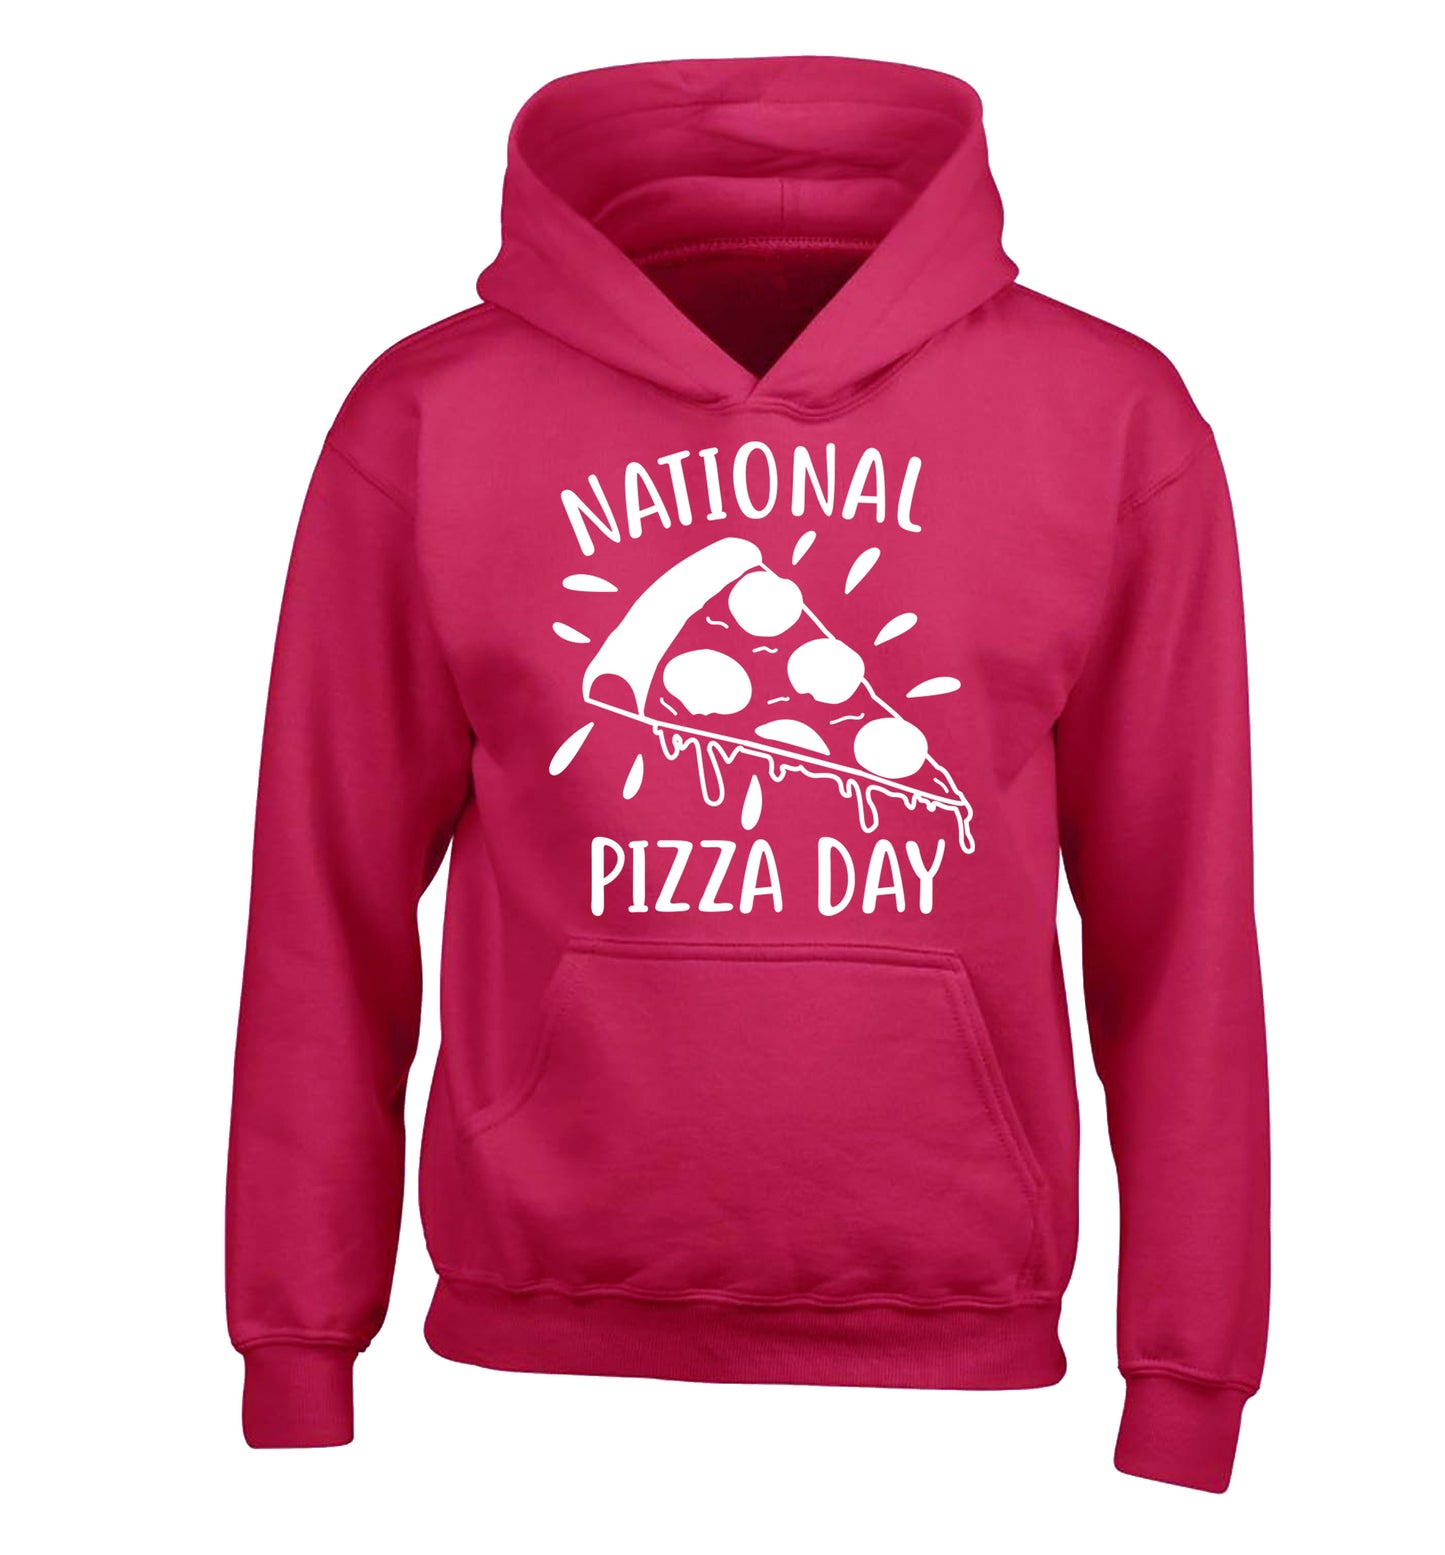 National pizza day children's pink hoodie 12-13 Years